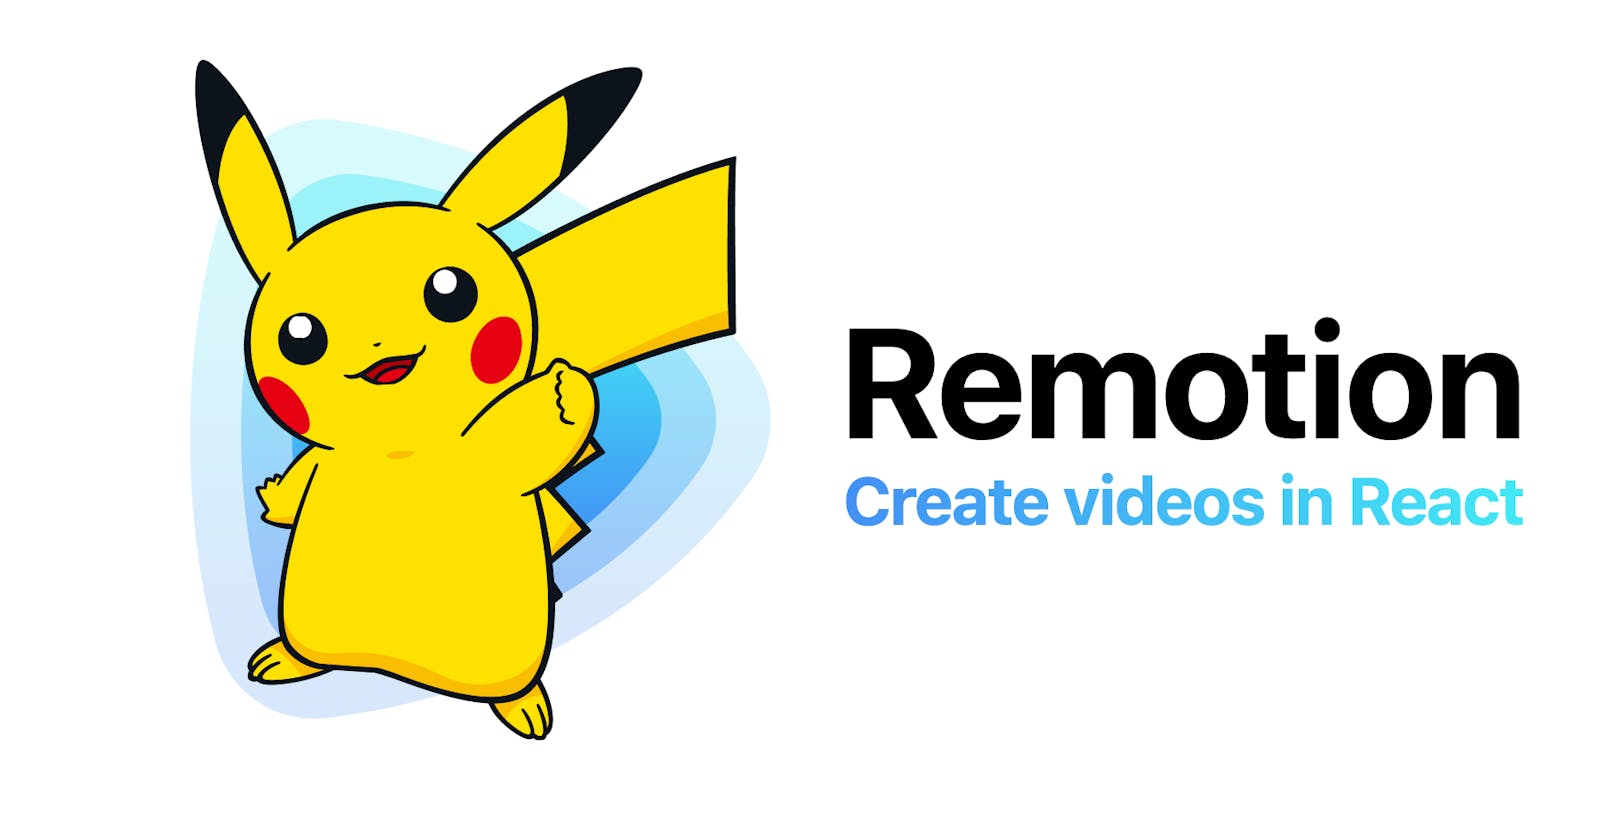 Remotion: Make a video of the original Kanto pokemon *from code* Part 1